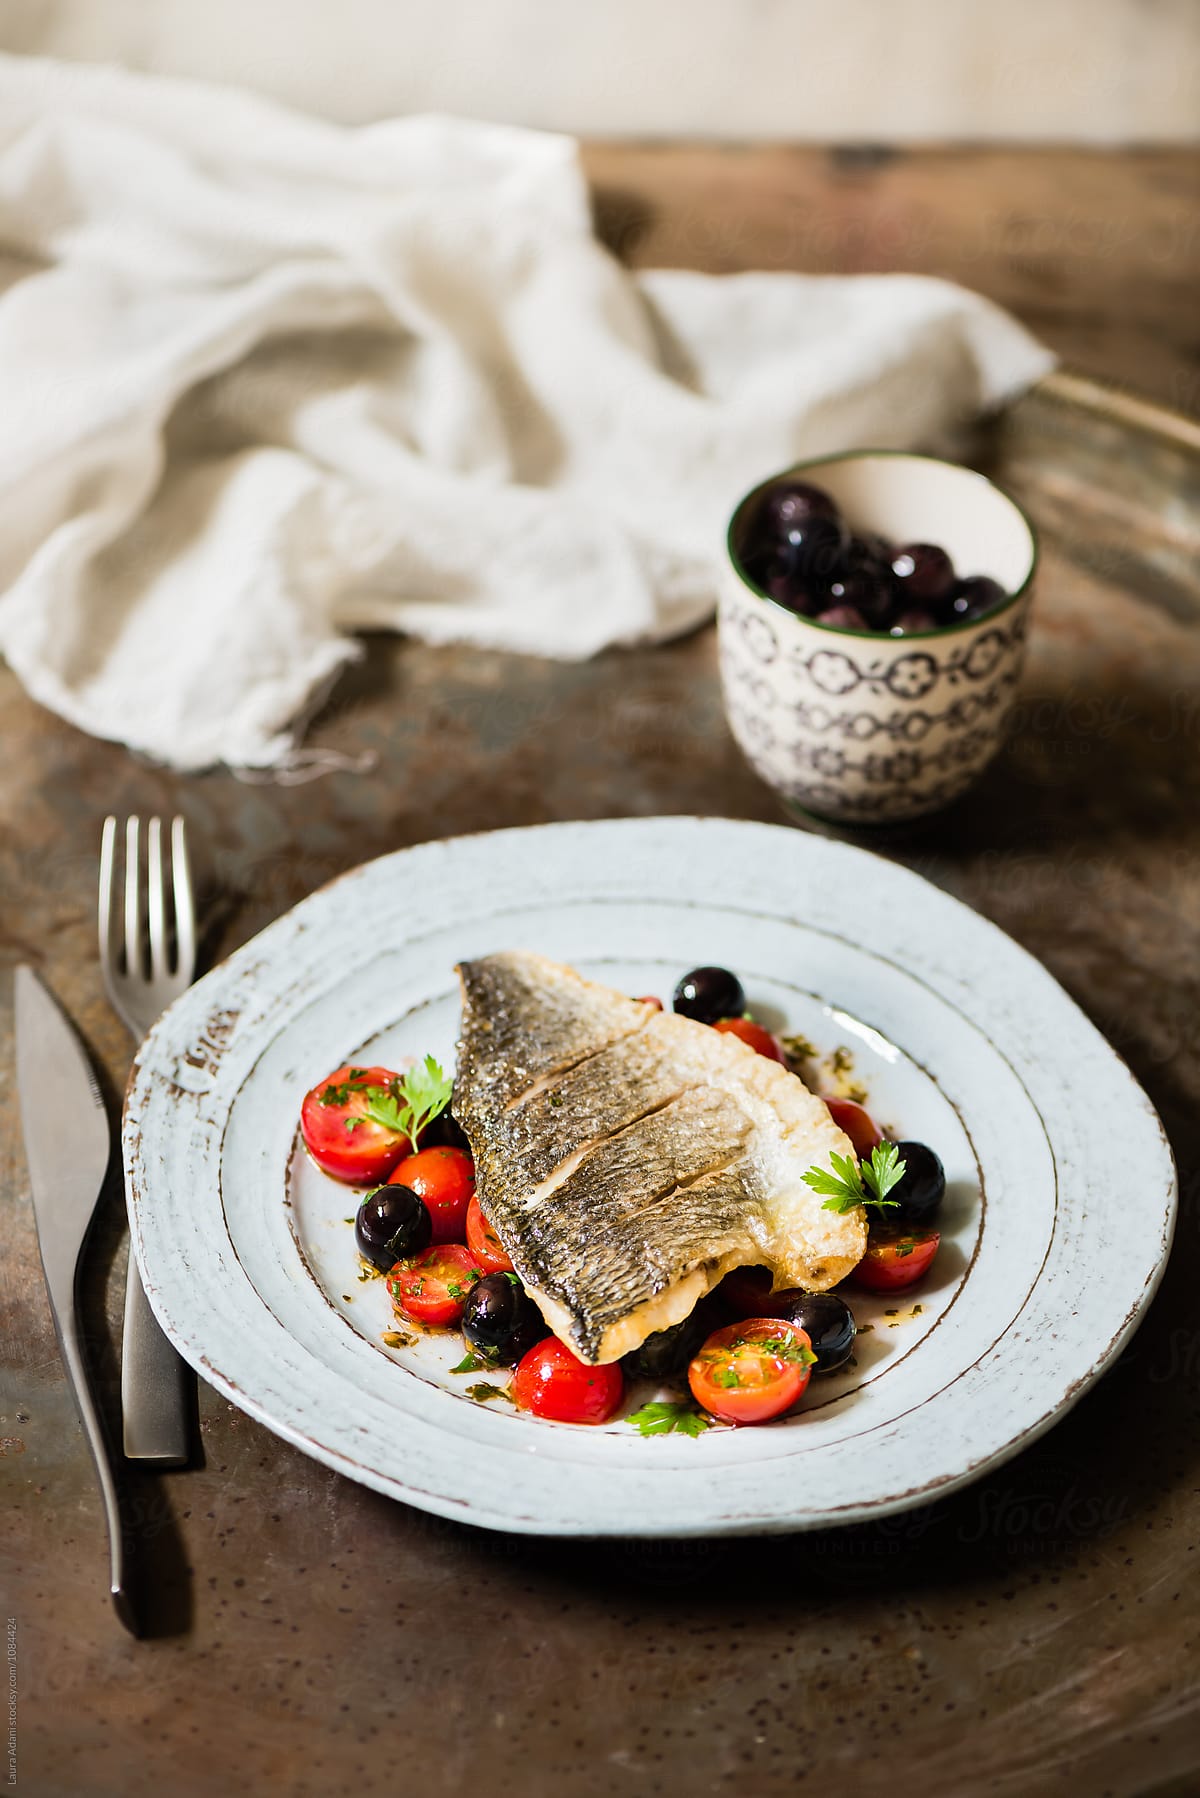 Seabream fillet with cherry tomatoes and black olives